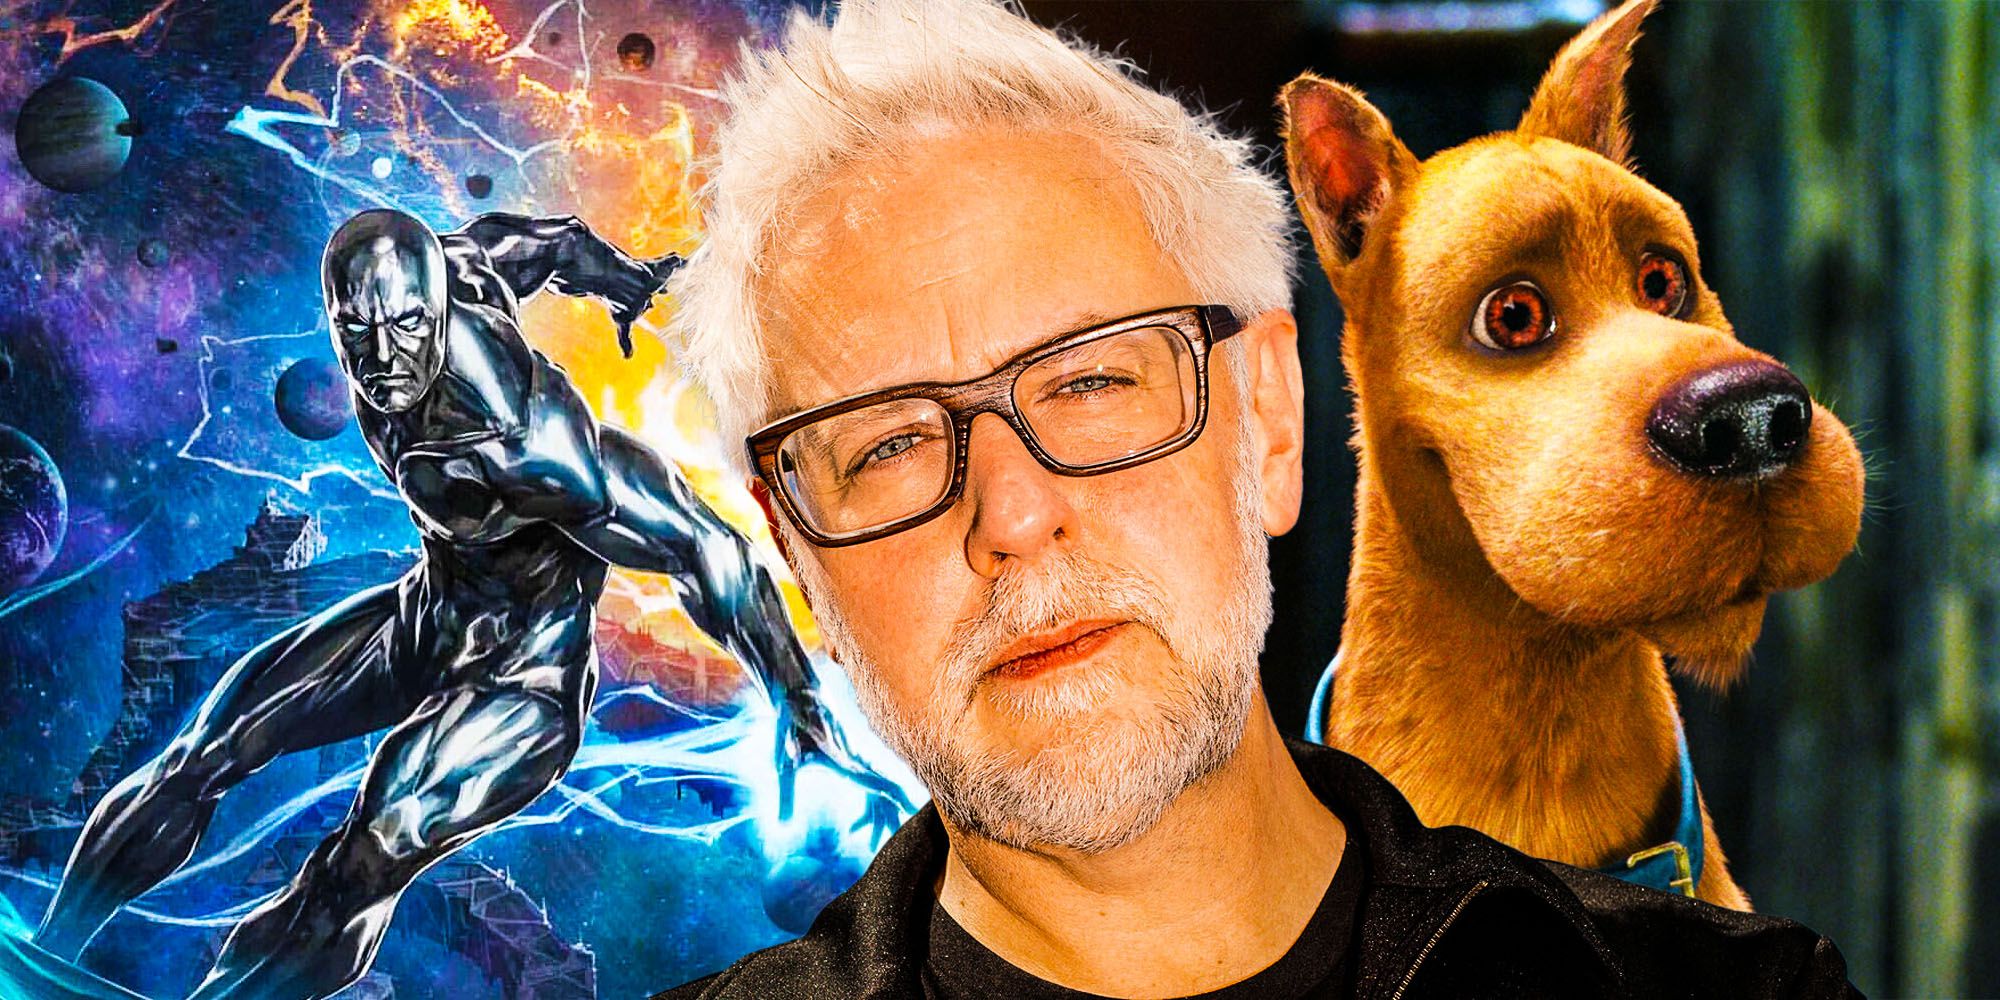 James gunn unmade movies Scooby doo 3 Silver surfer